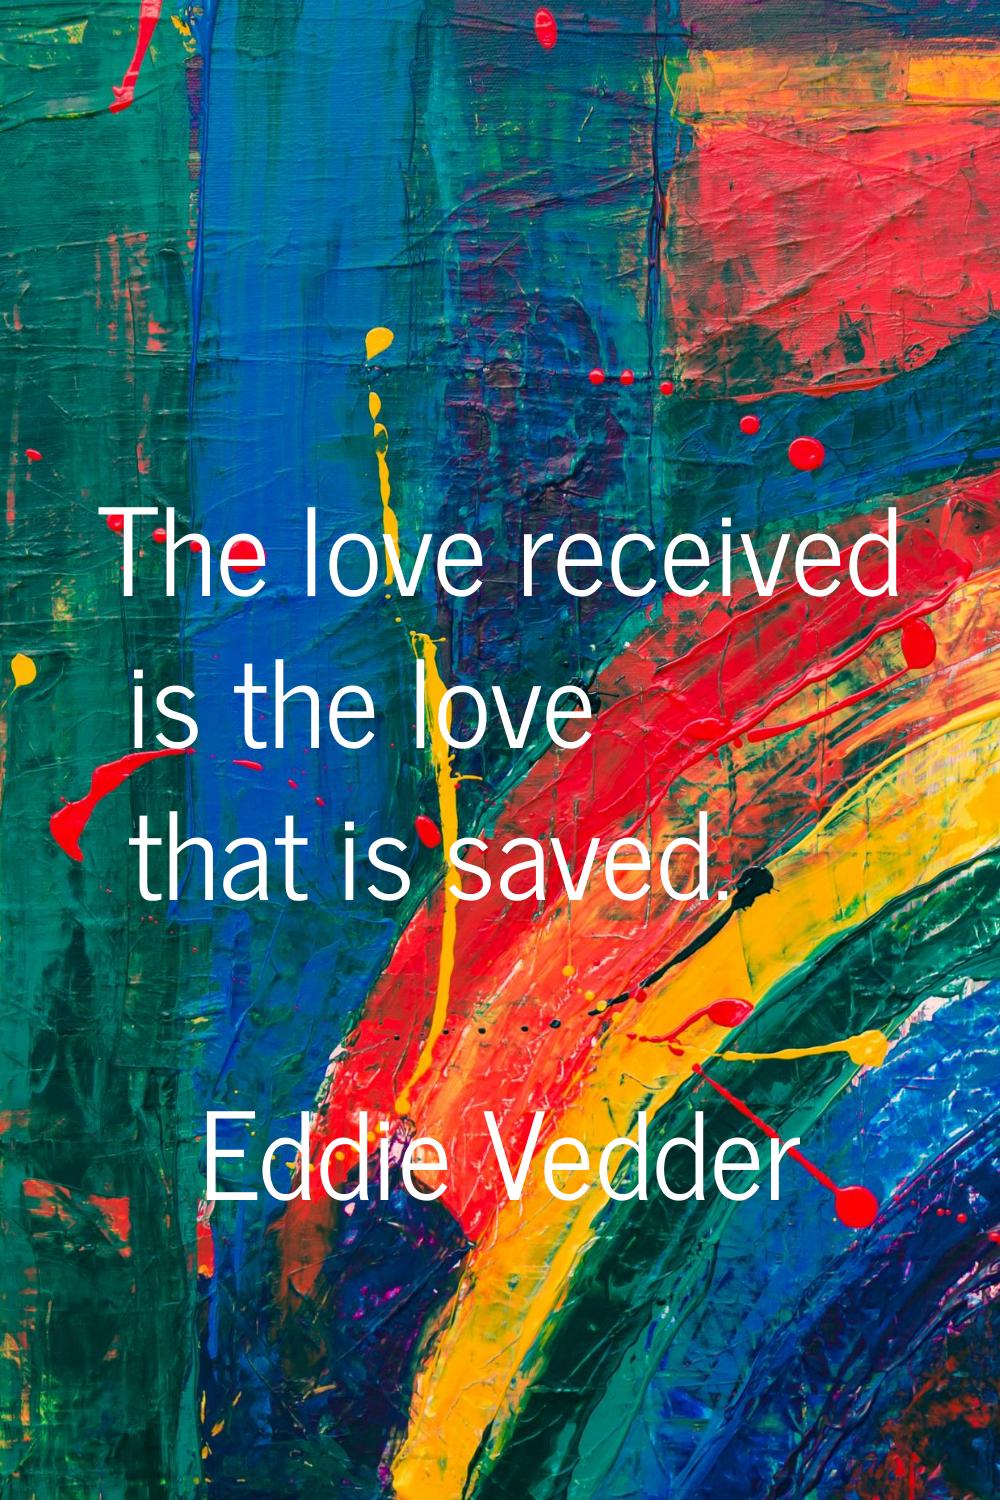 The love received is the love that is saved.